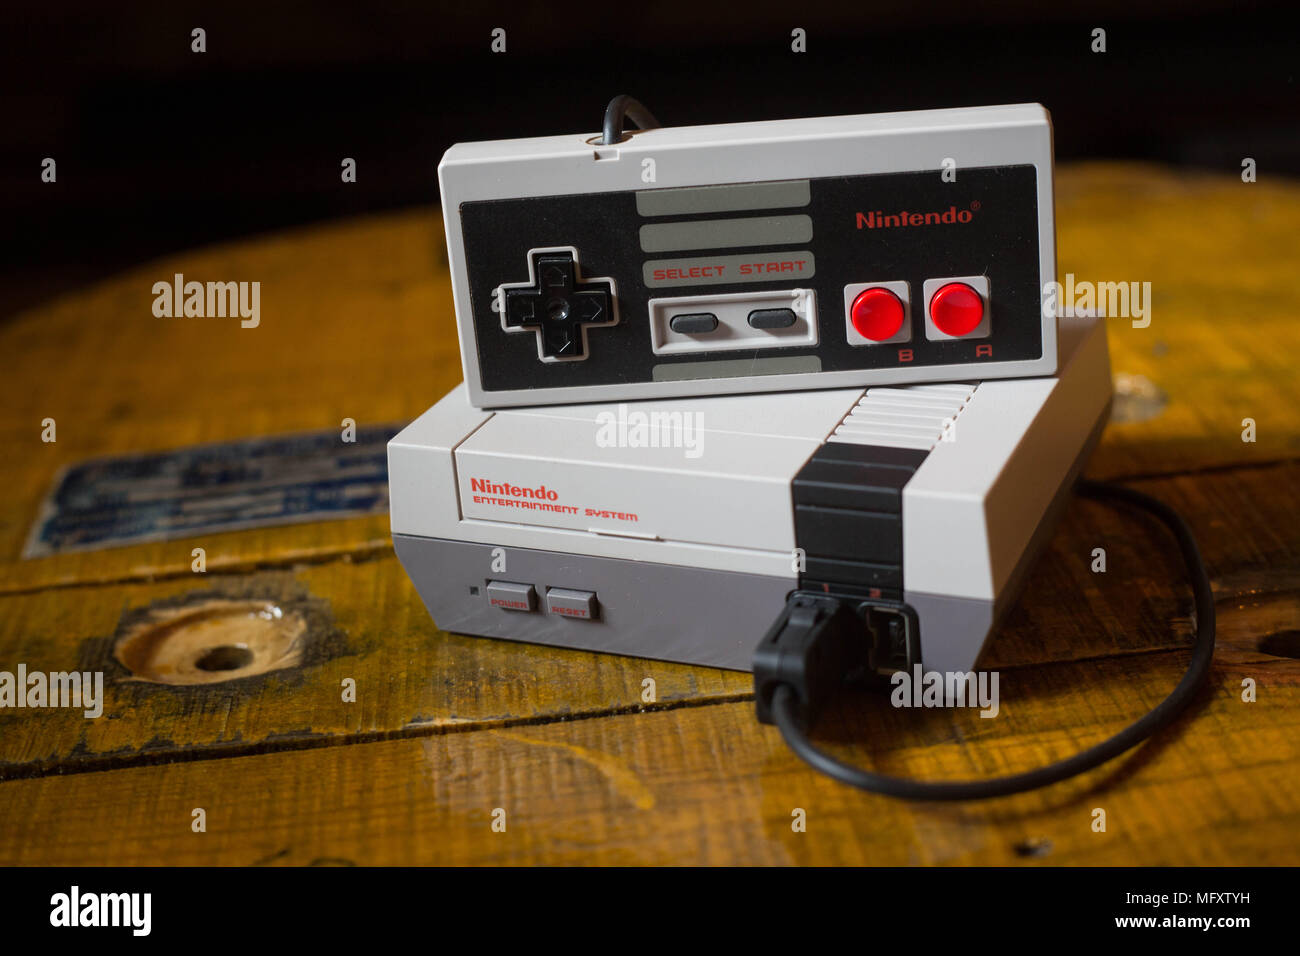 A Nintendo Classic Mini 'Nintendo Entertainment System' video game console with a controller plugged on it. The Kyoto based video game company Nintendo ended it’s comeback year revenue with worth $9 Billion after a glorious year 2017 notably with the launch of the hybrid console the Nintendo Switch, mini retro vintage game consoles such as the Nintendo Entertainment System and Super Nintendo as well as its mobile phone video games. Stock Photo